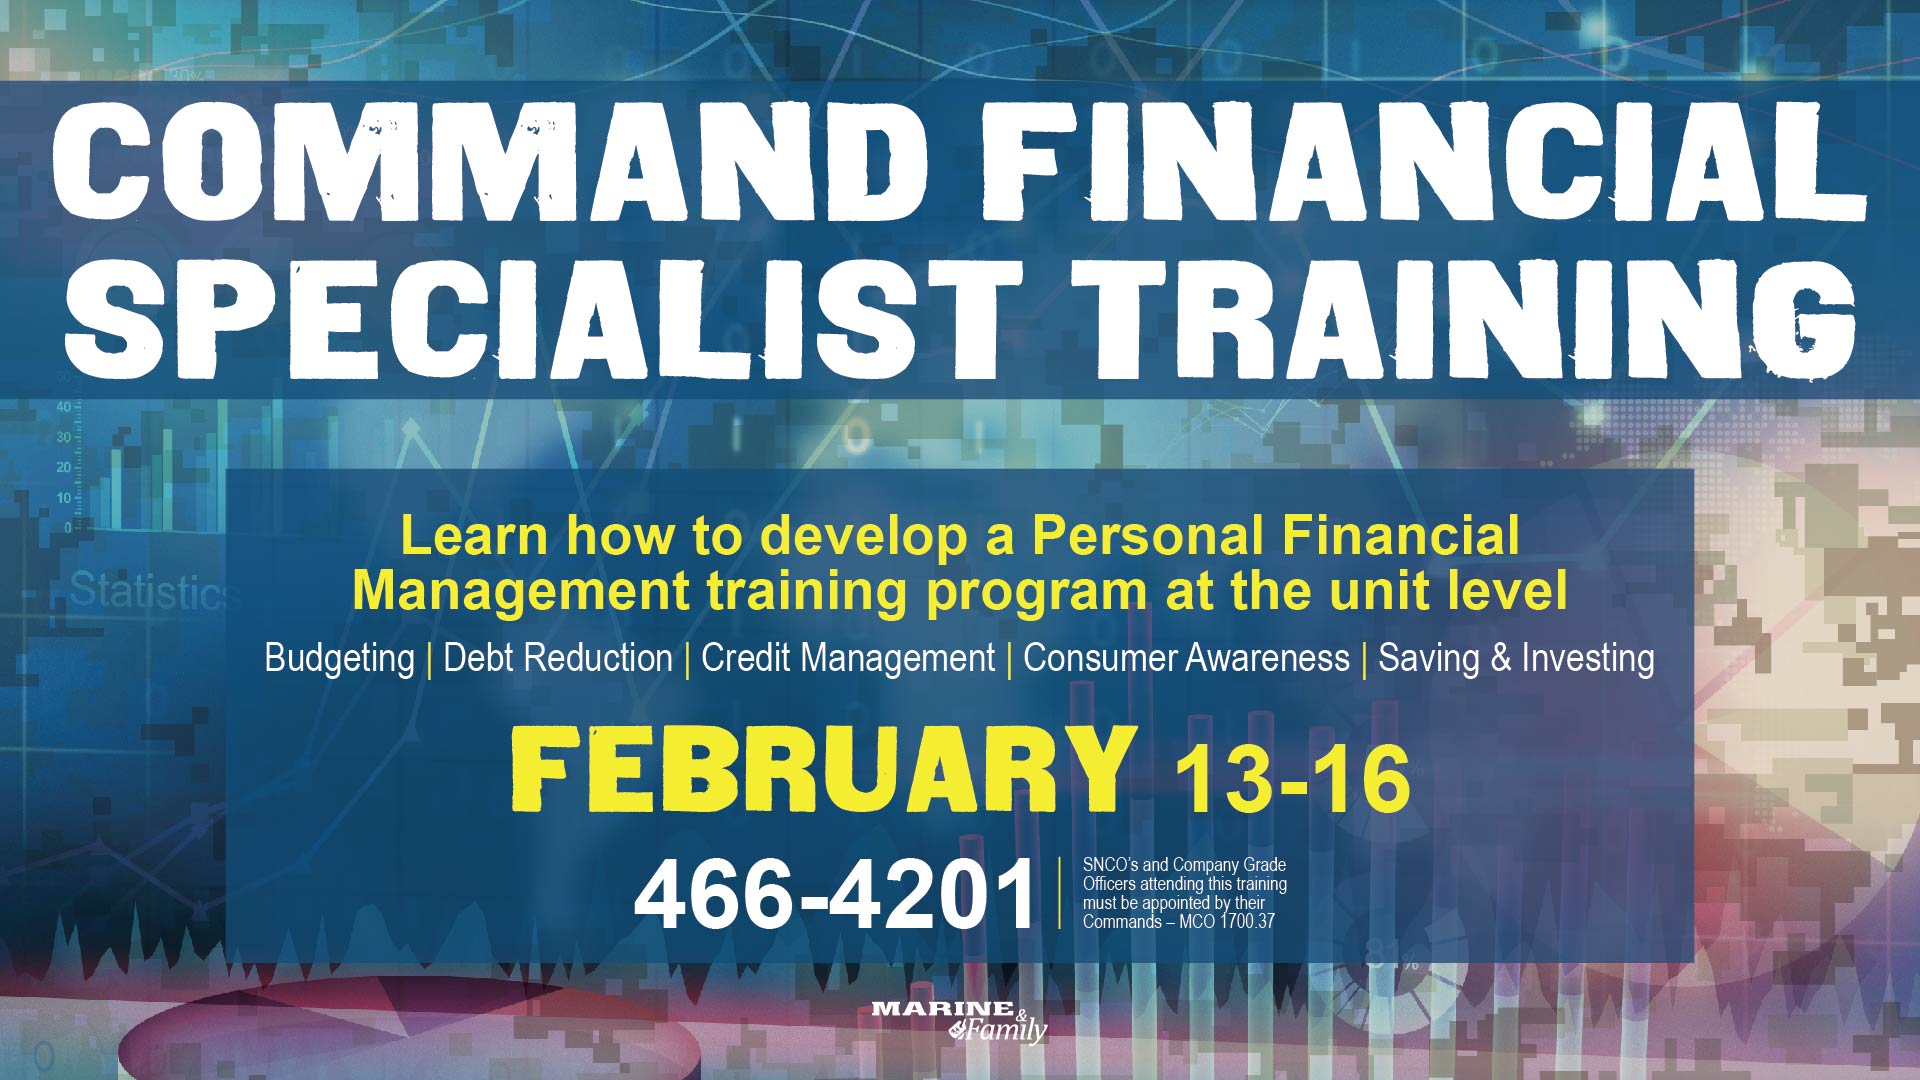 Command Financial Specialist Training